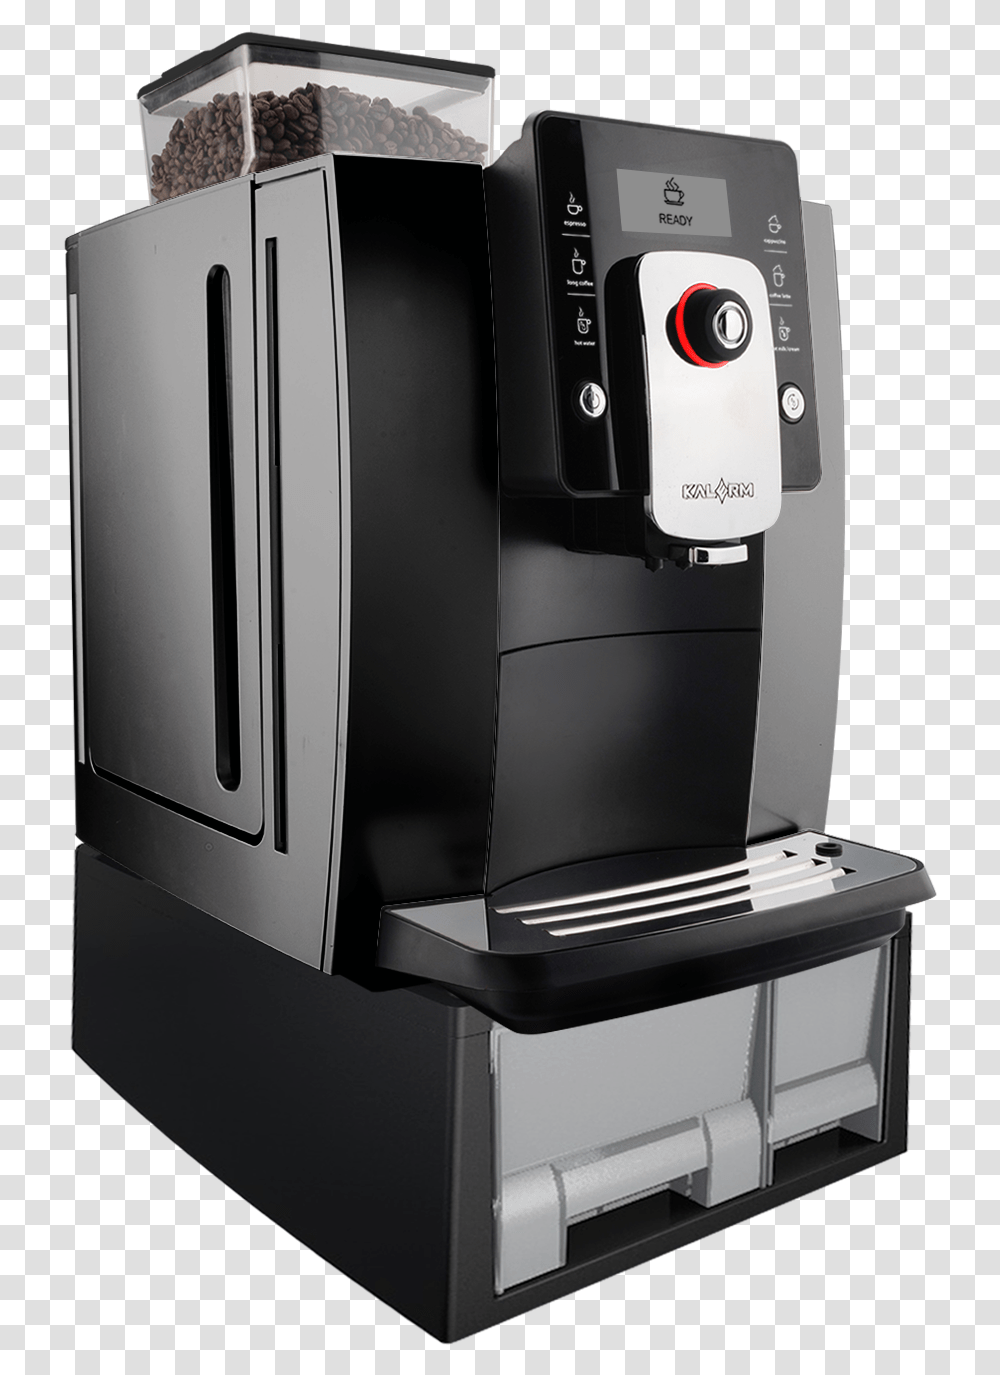 Coffee Machine Image Kalerm Coffee, Appliance, Coffee Cup, Toaster, Refrigerator Transparent Png